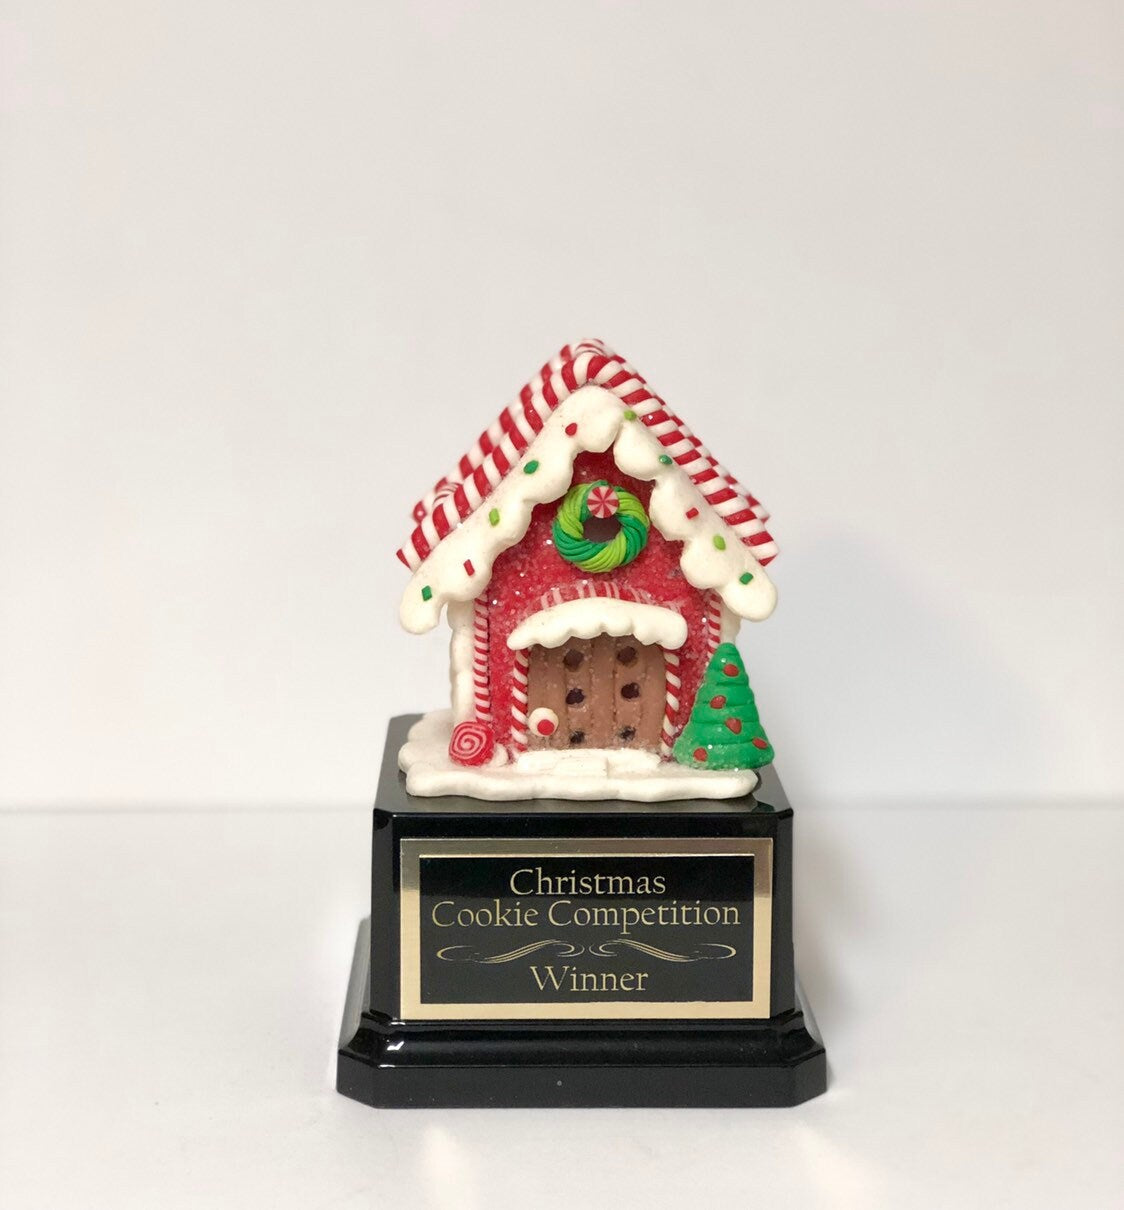 Gingerbread House Cookie Decorating Bake Off Trophy Ugly Sweater Trophy Christmas Cookie Gingerbread Man Christmas Decor